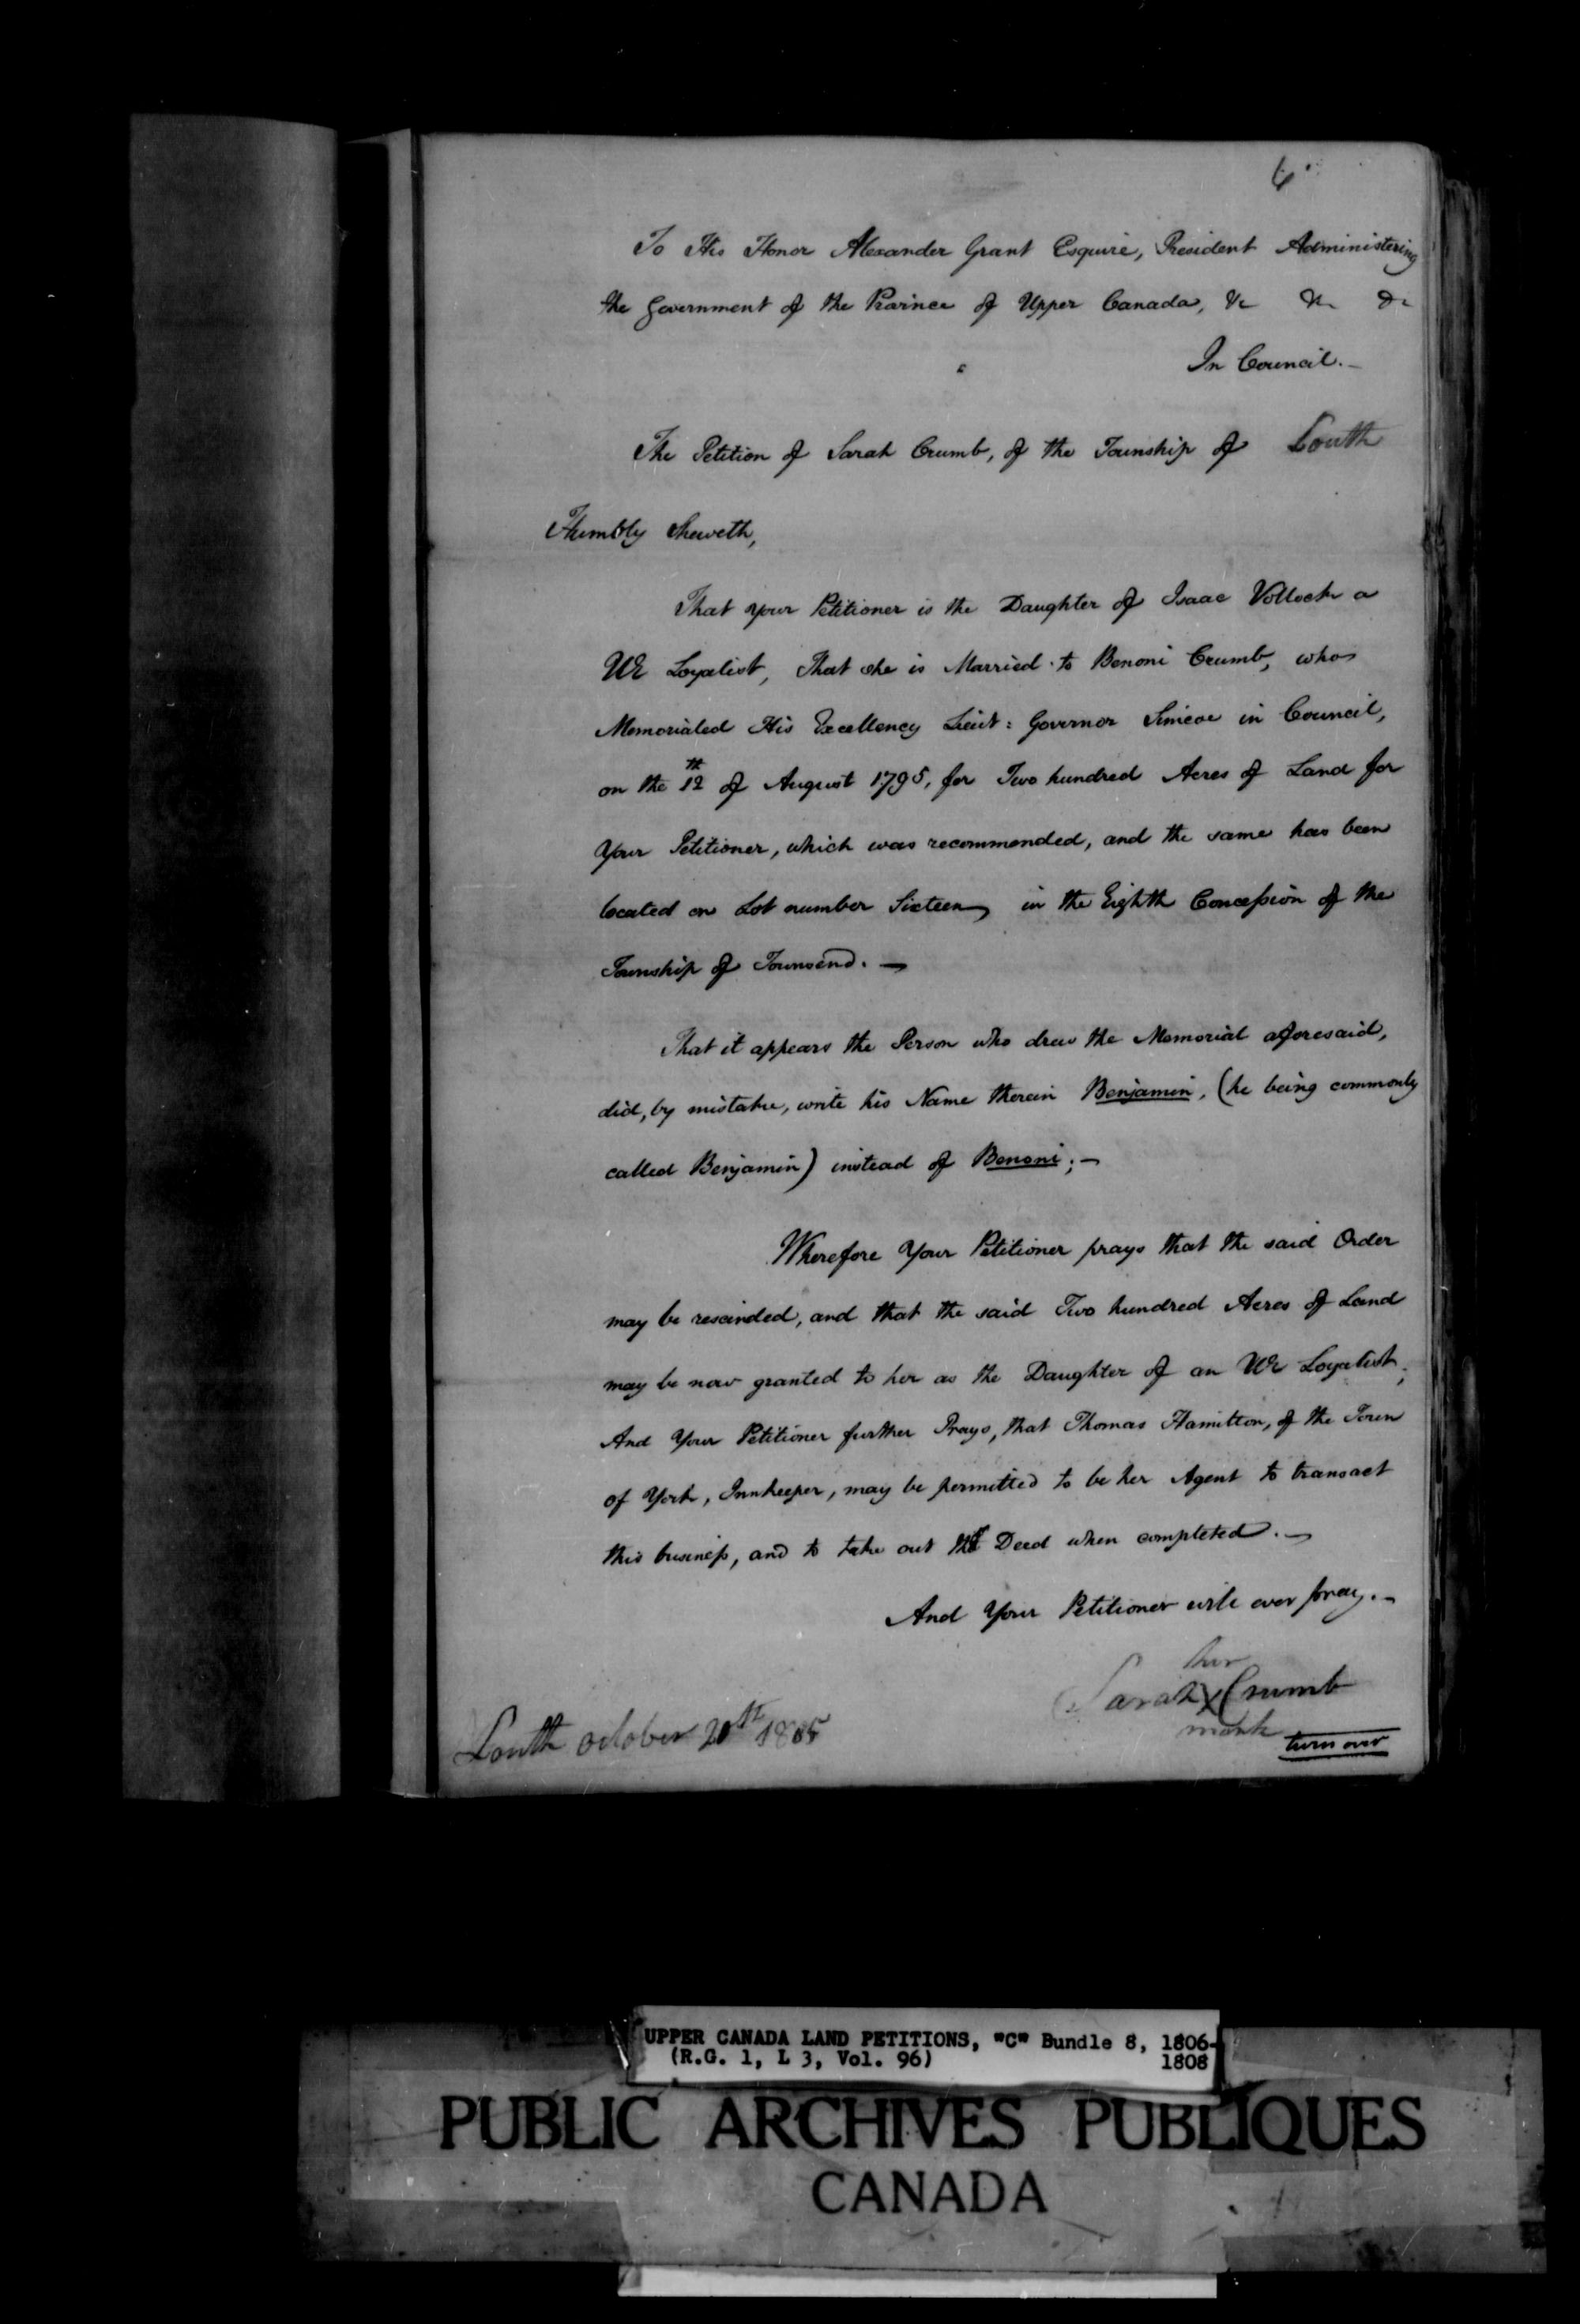 Title: Upper Canada Land Petitions (1763-1865) - Mikan Number: 205131 - Microform: c-1650